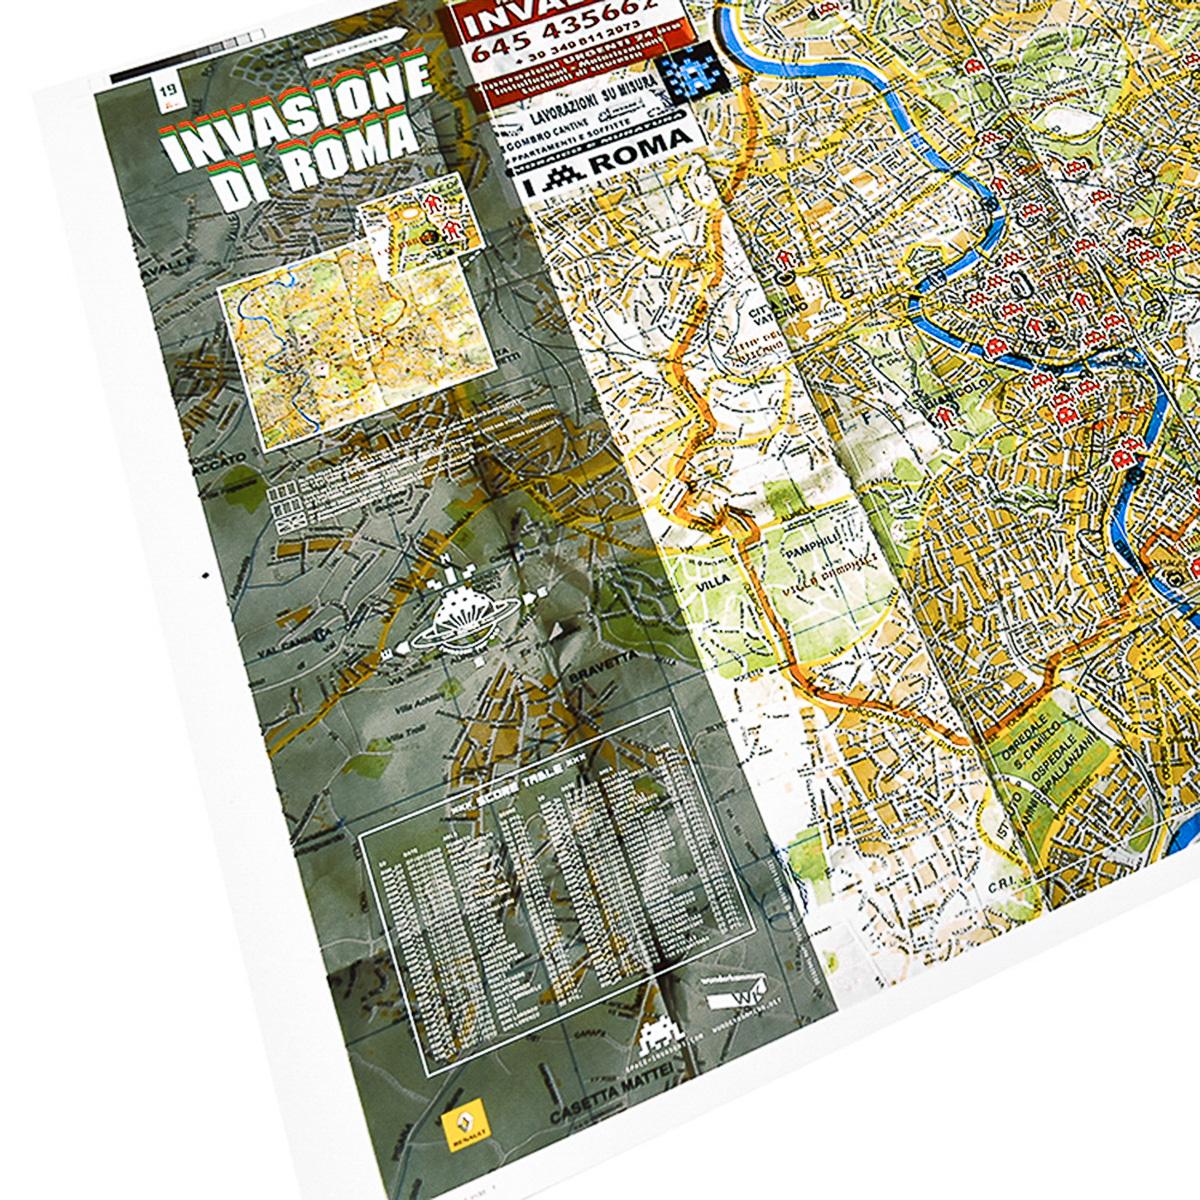 Print version of the Invader Rome Map. Never folded.
Hand signed and numbered by Invader.
Limited edition of only 50 never folded examples on premium paper. Lines on image are part of the artwork.
Shows the location of all the Invader mosaics